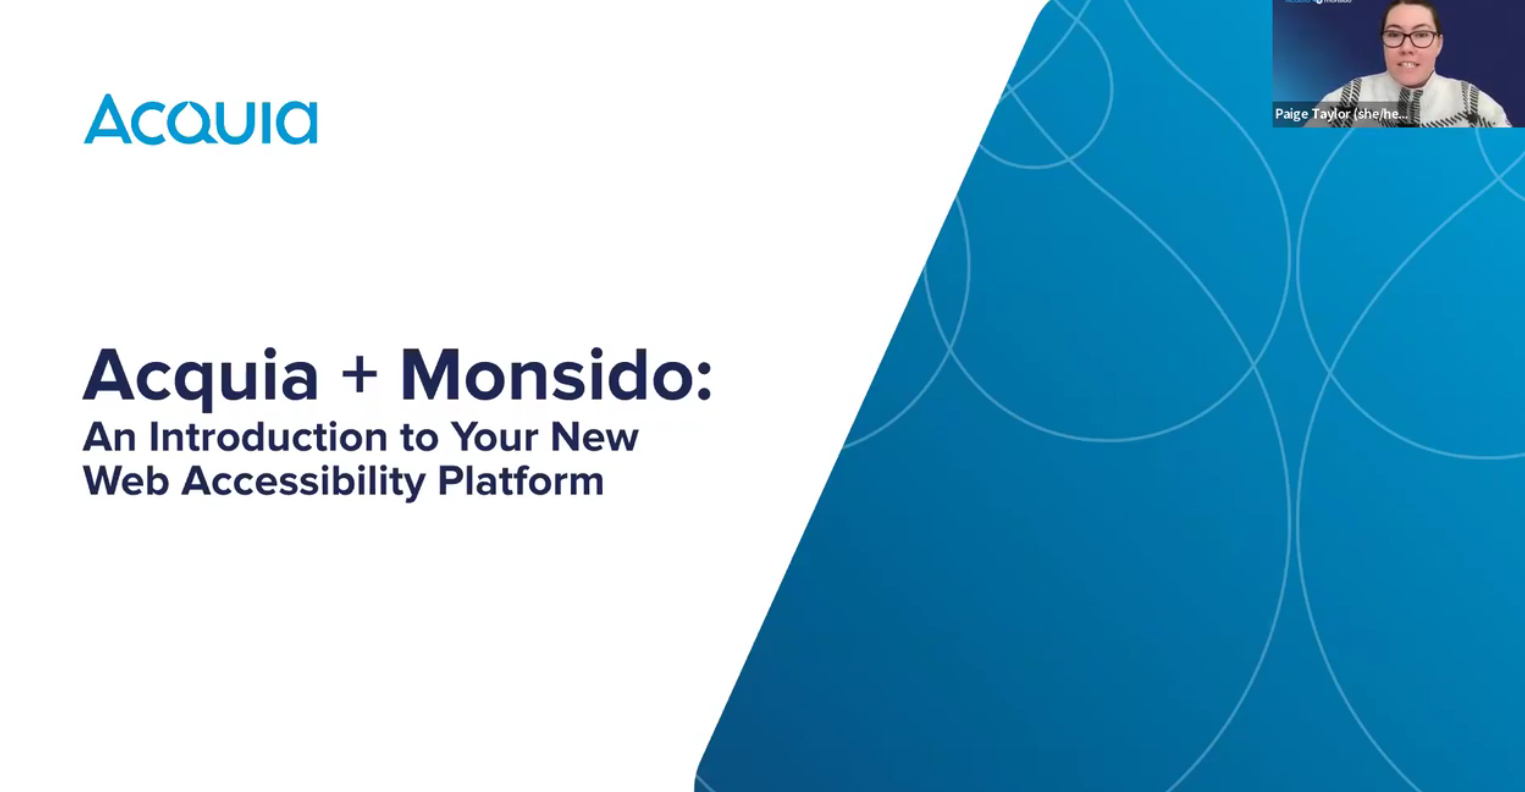 Acquia + Monsido: An Introduction to Your New Web Accessibility Platform™ for DXP